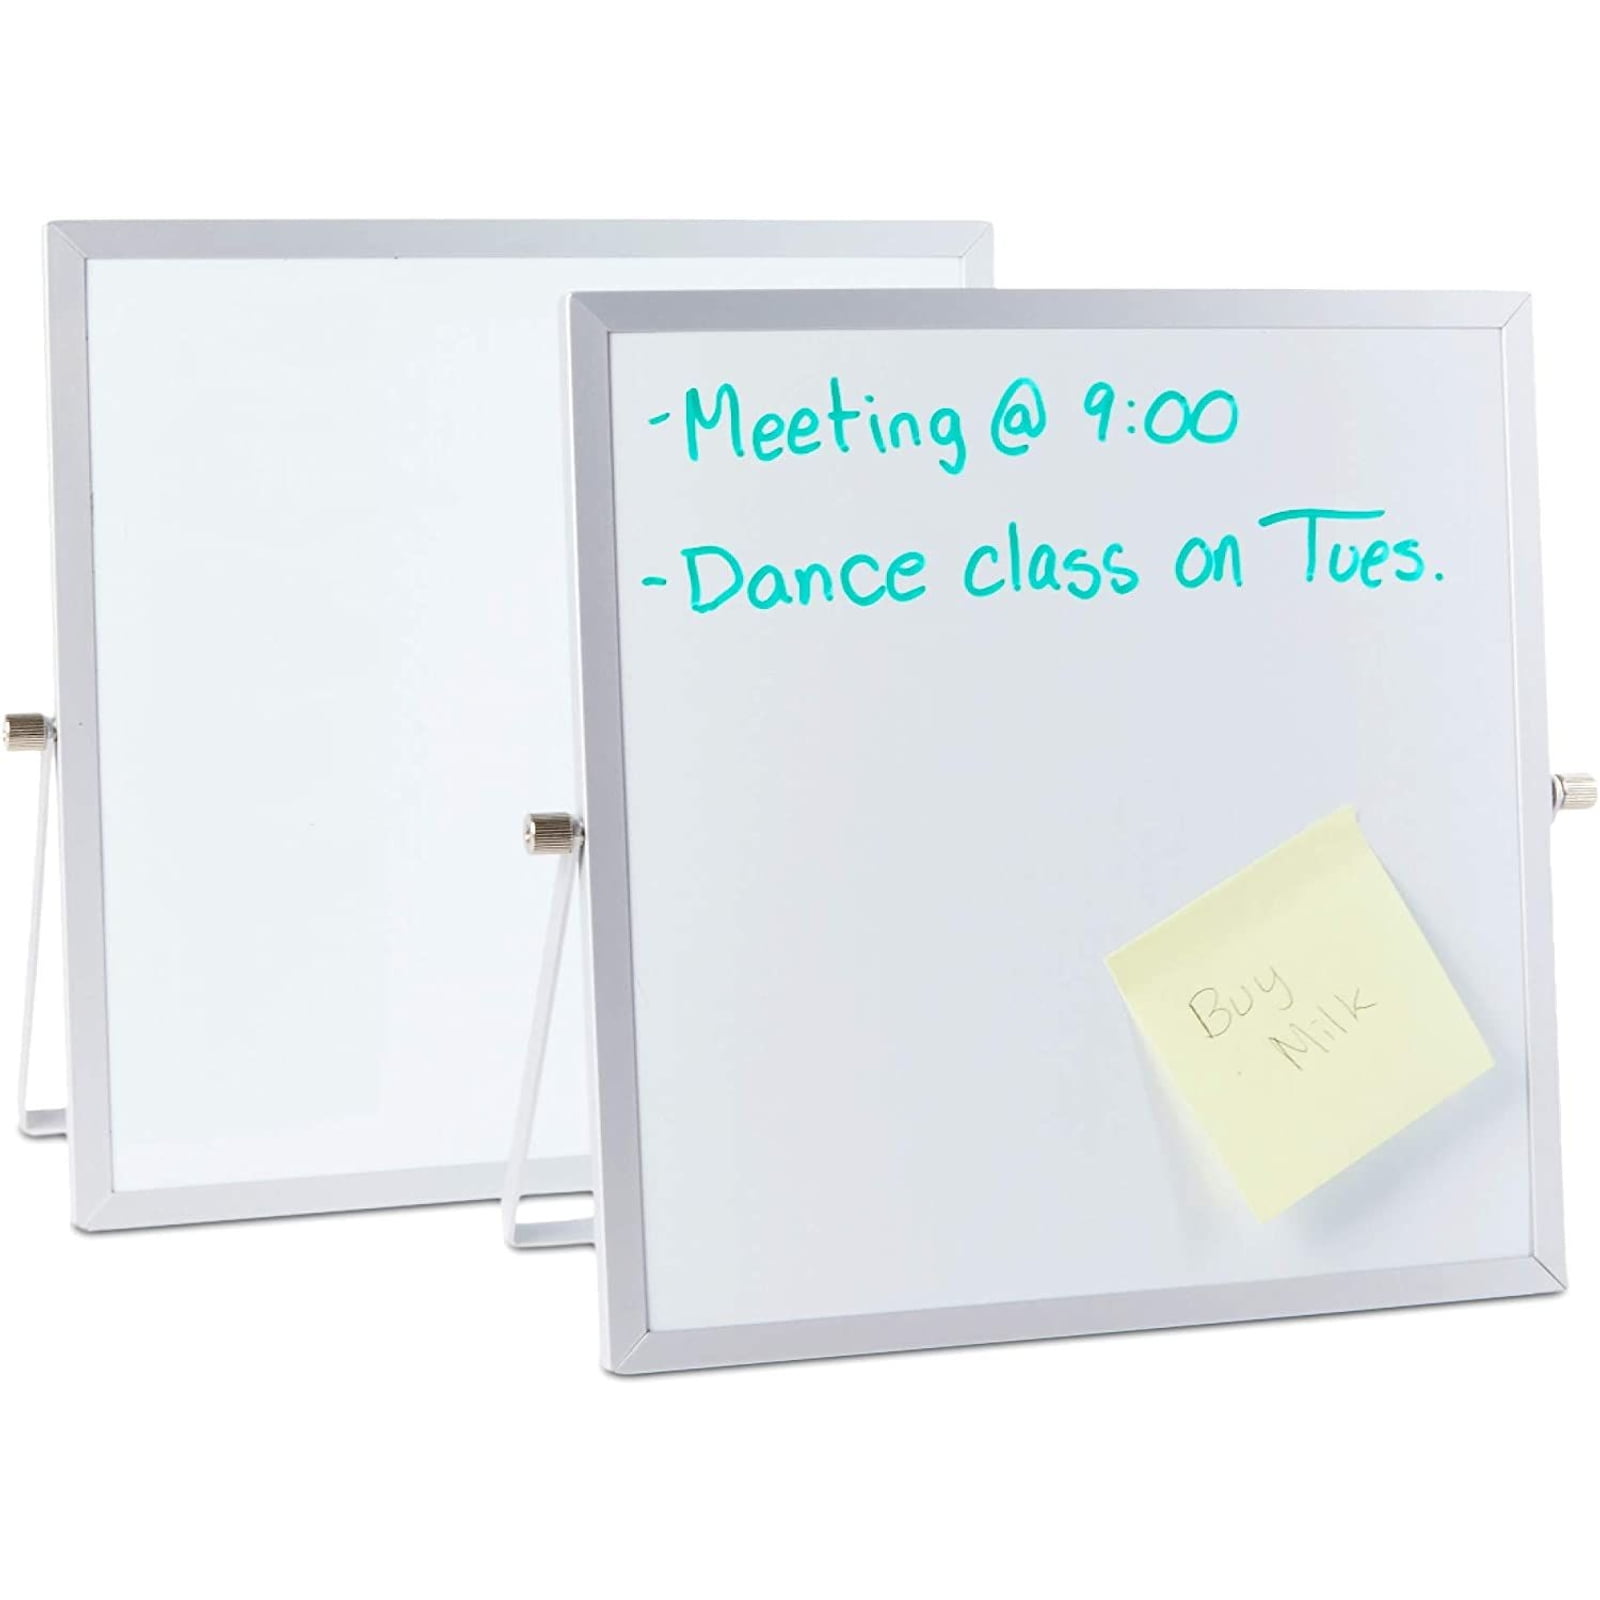 Portable for Children Kids and for Personal Use Students Desktop Small White Board 10x10 Dry Erase Magnetic Mini Whiteboard Tabletop for Office Includes Eraser and 3 Buttons 